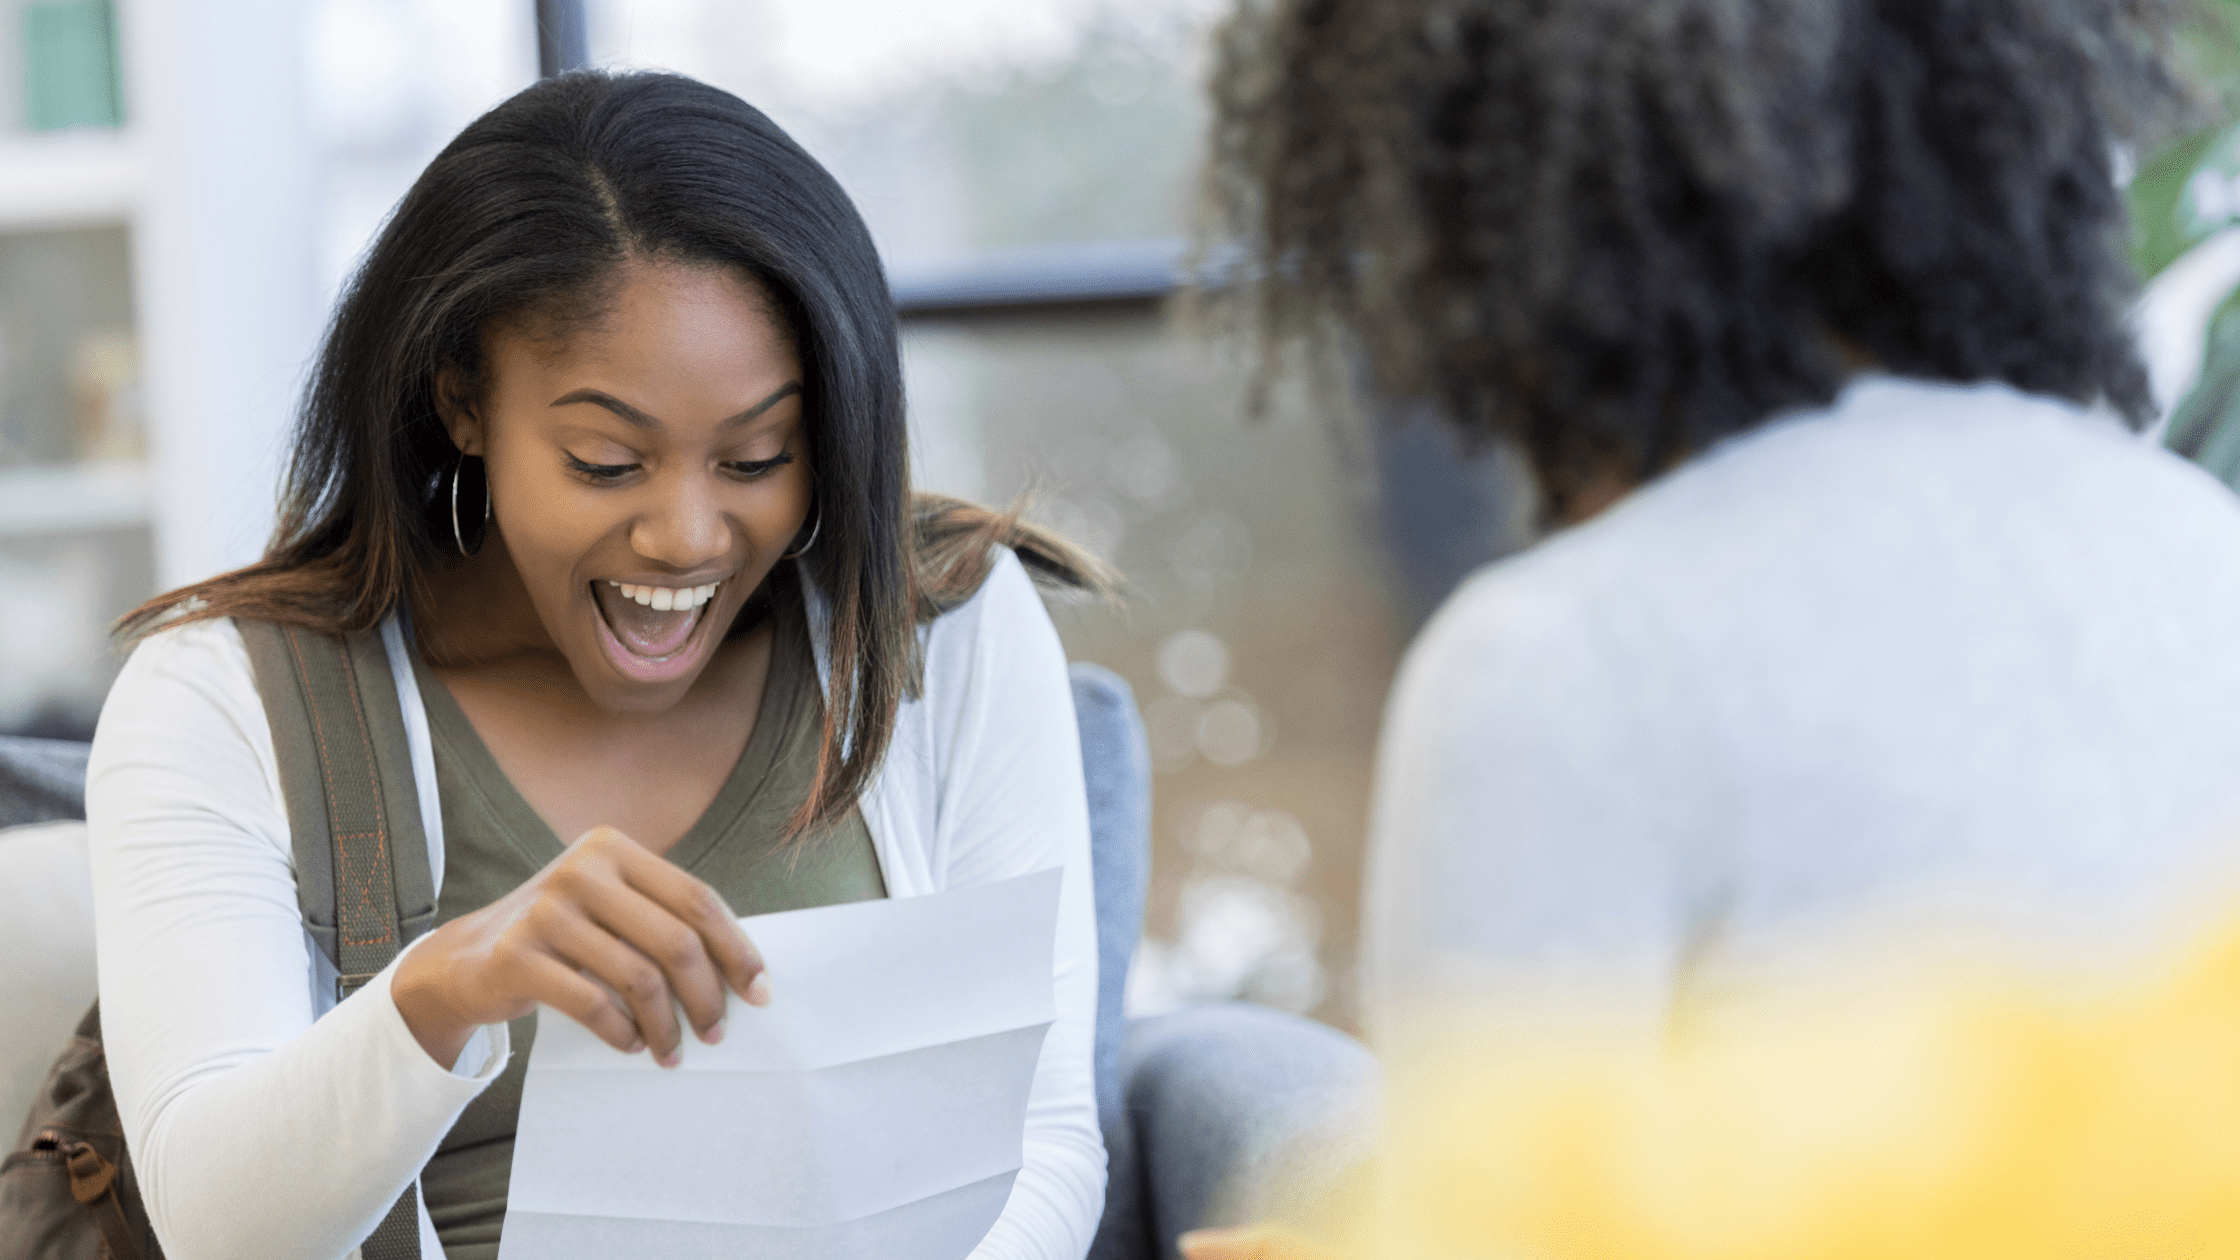 A medical school student looking excitedly at a piece of paper after finding out that she passed Step 1.